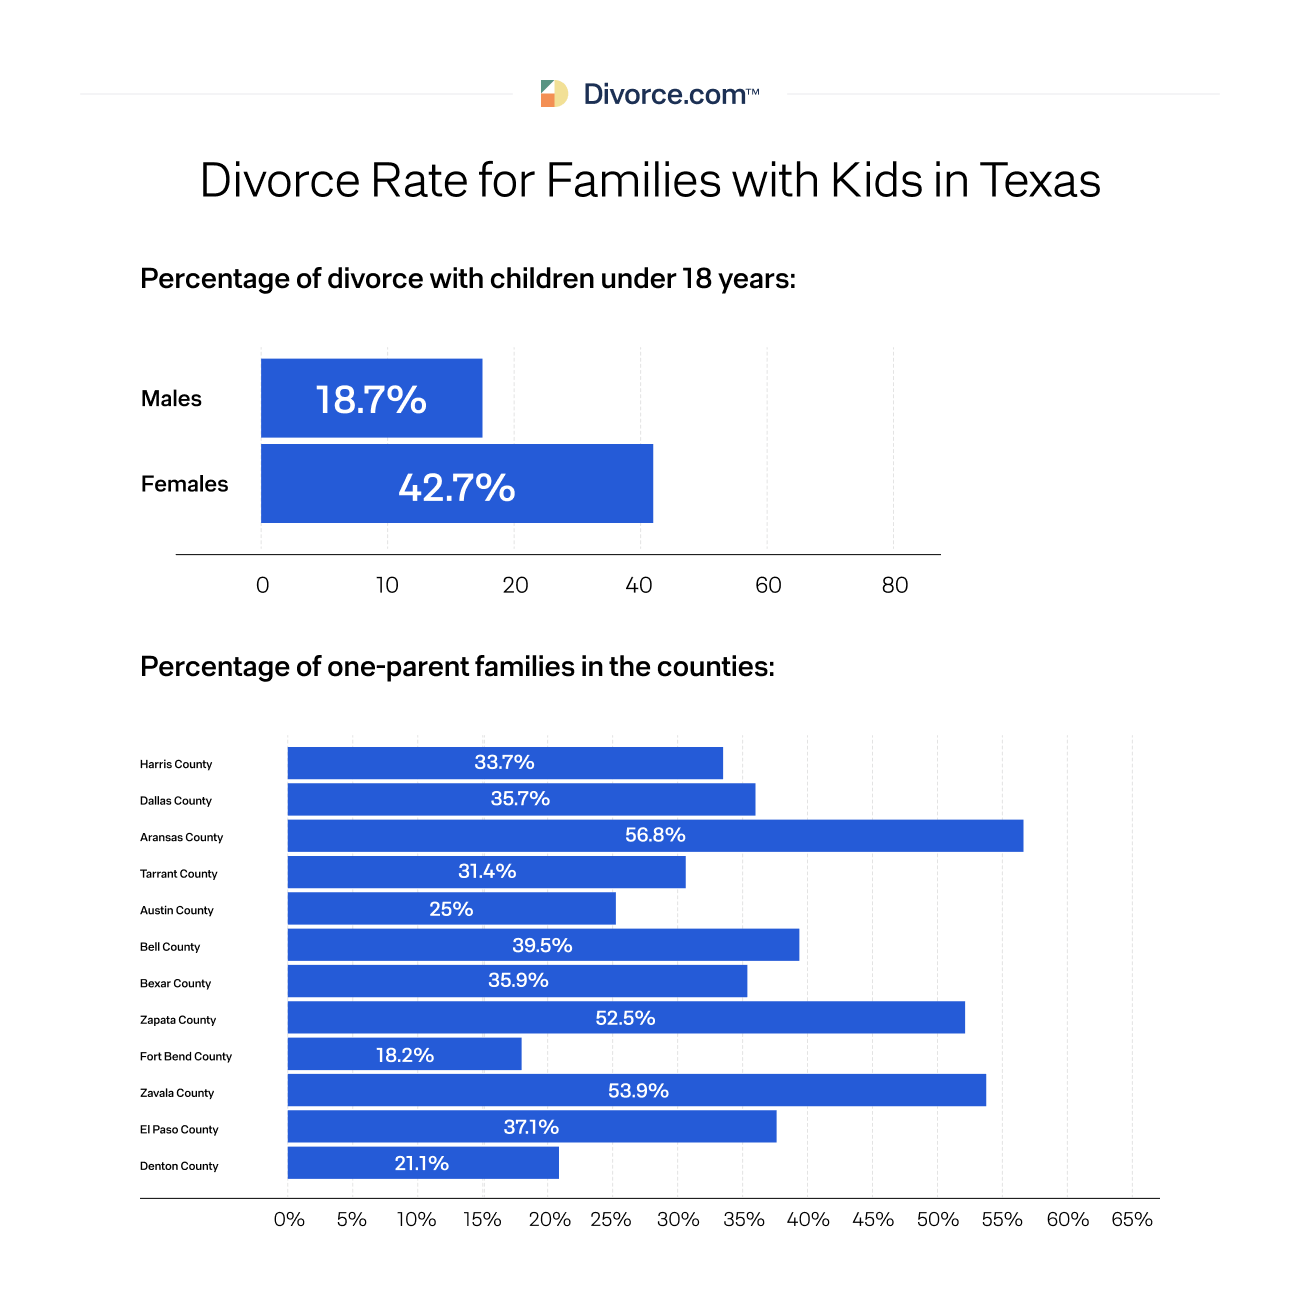 Divorce Rate for Families with Kids in Texas